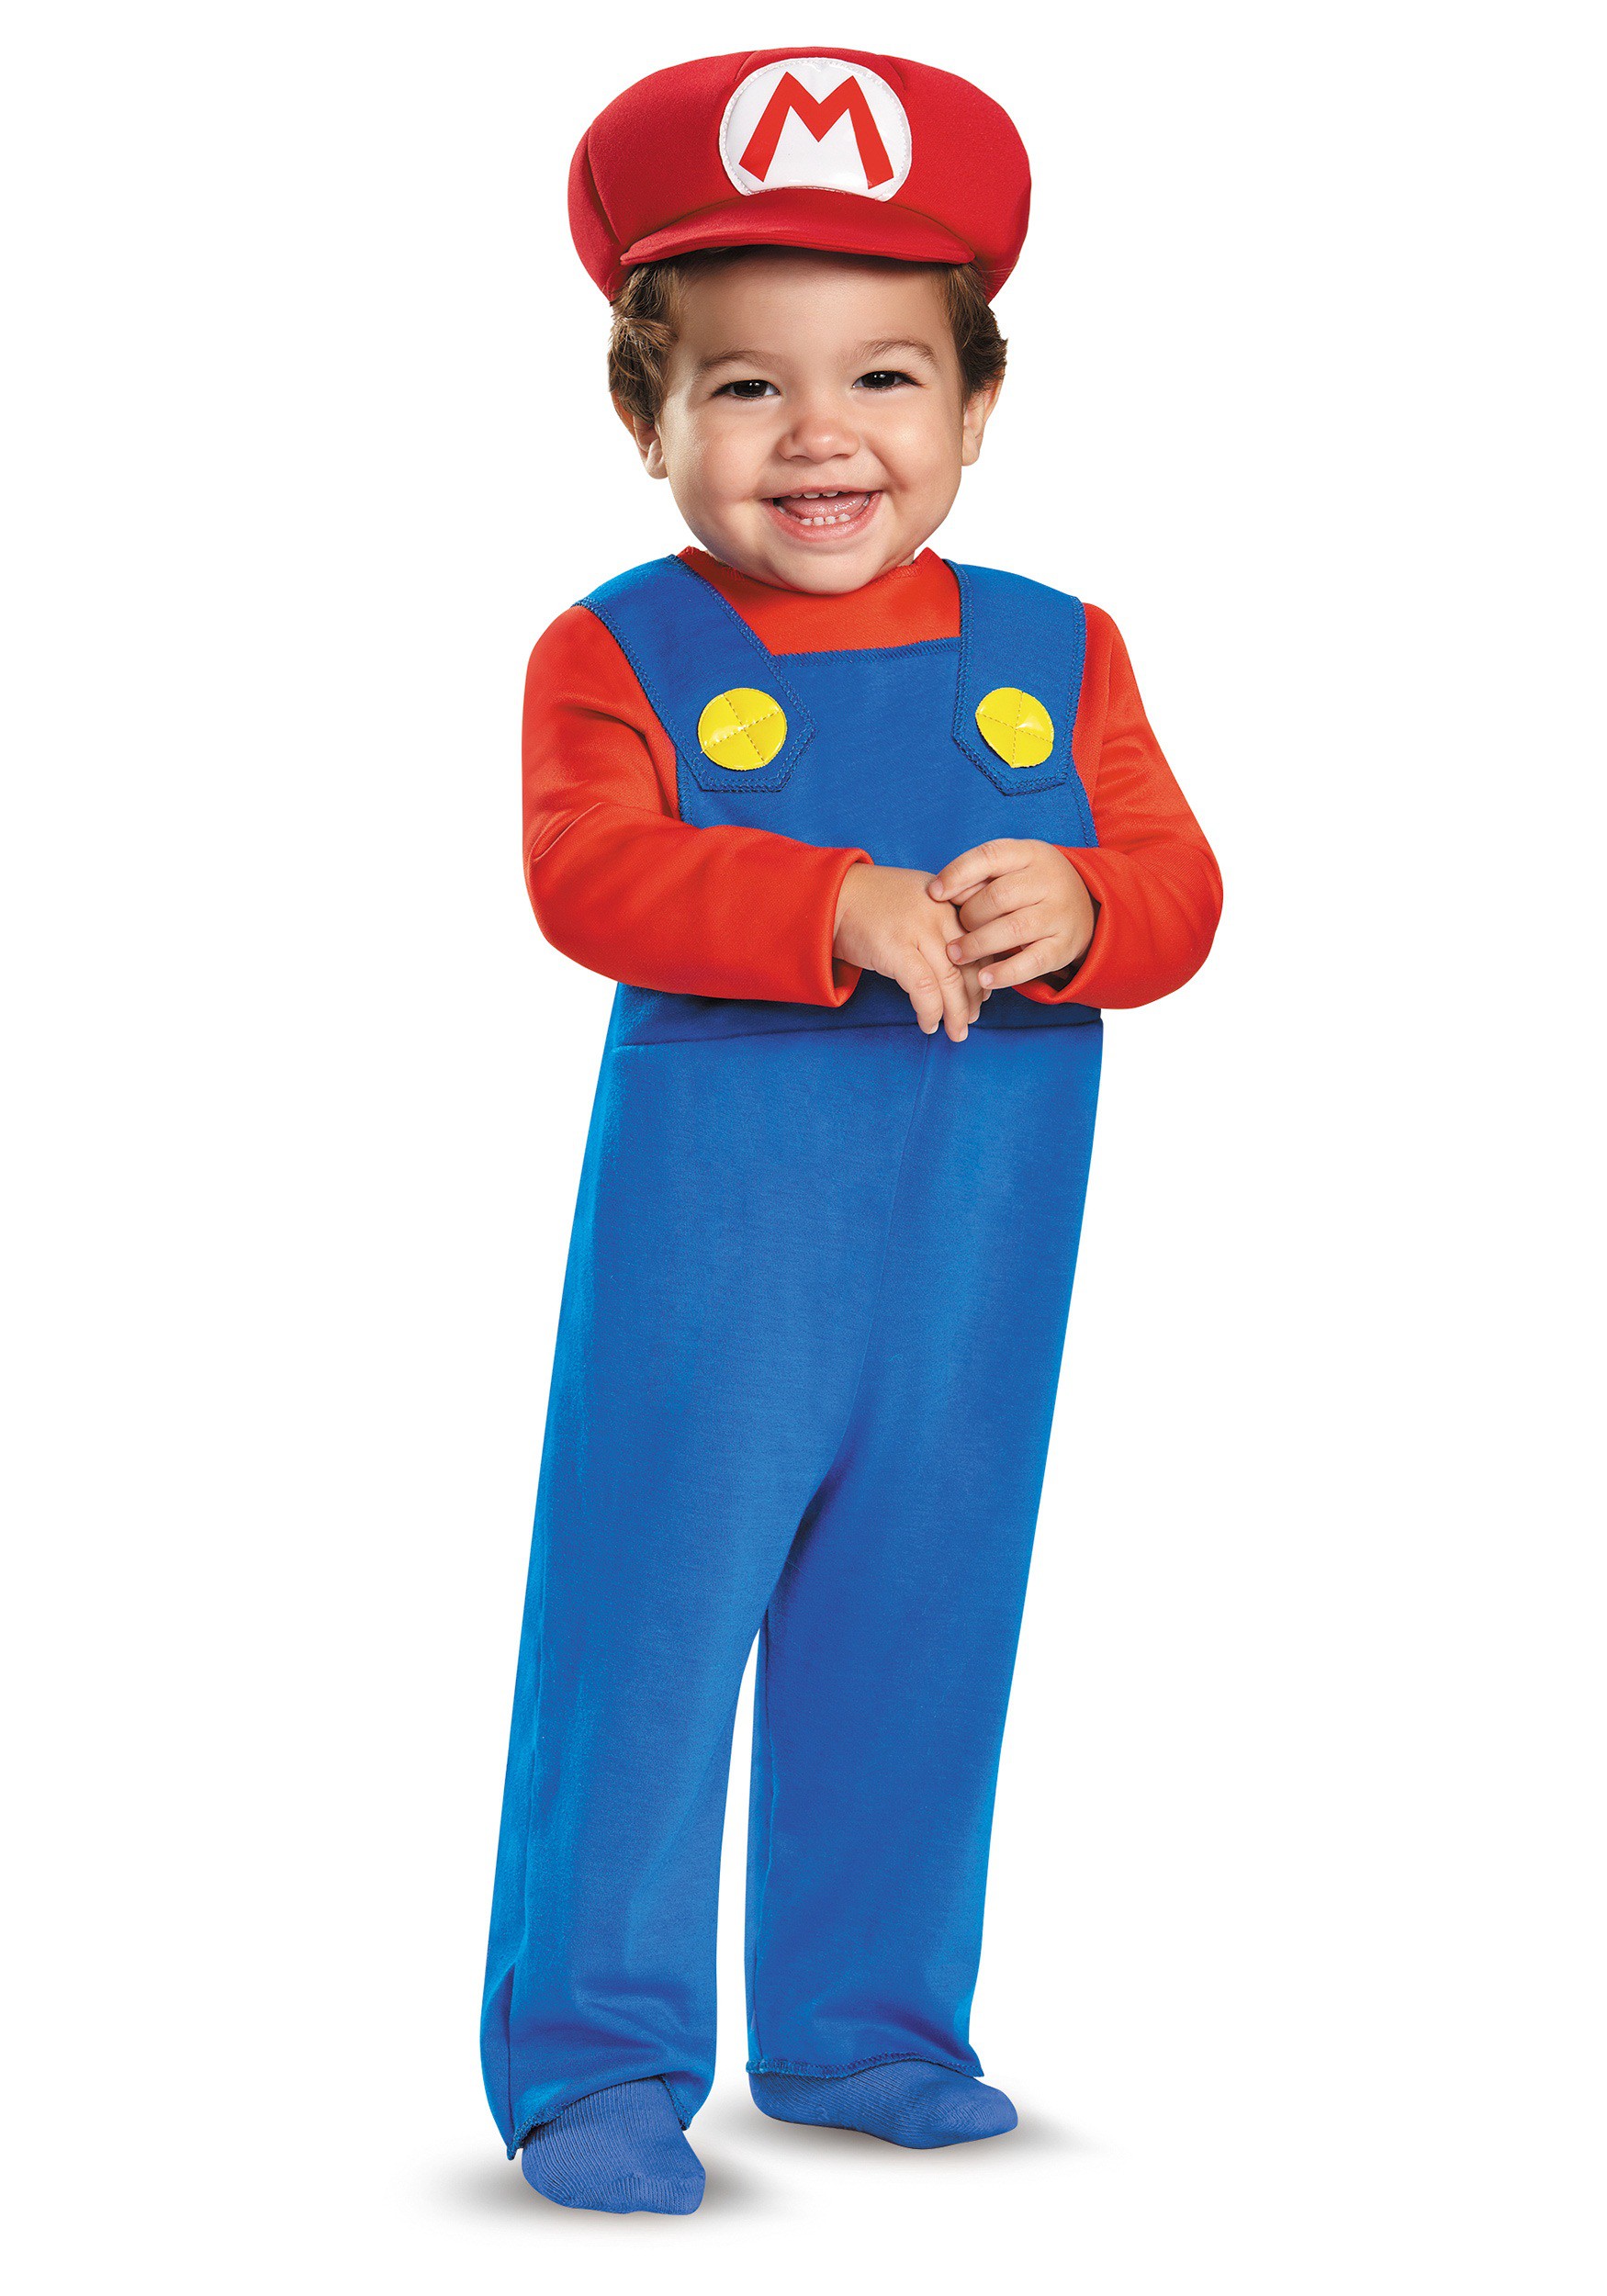 Photos - Fancy Dress MARIO Disguise  Costume for Infants Blue/Red DI85135W 